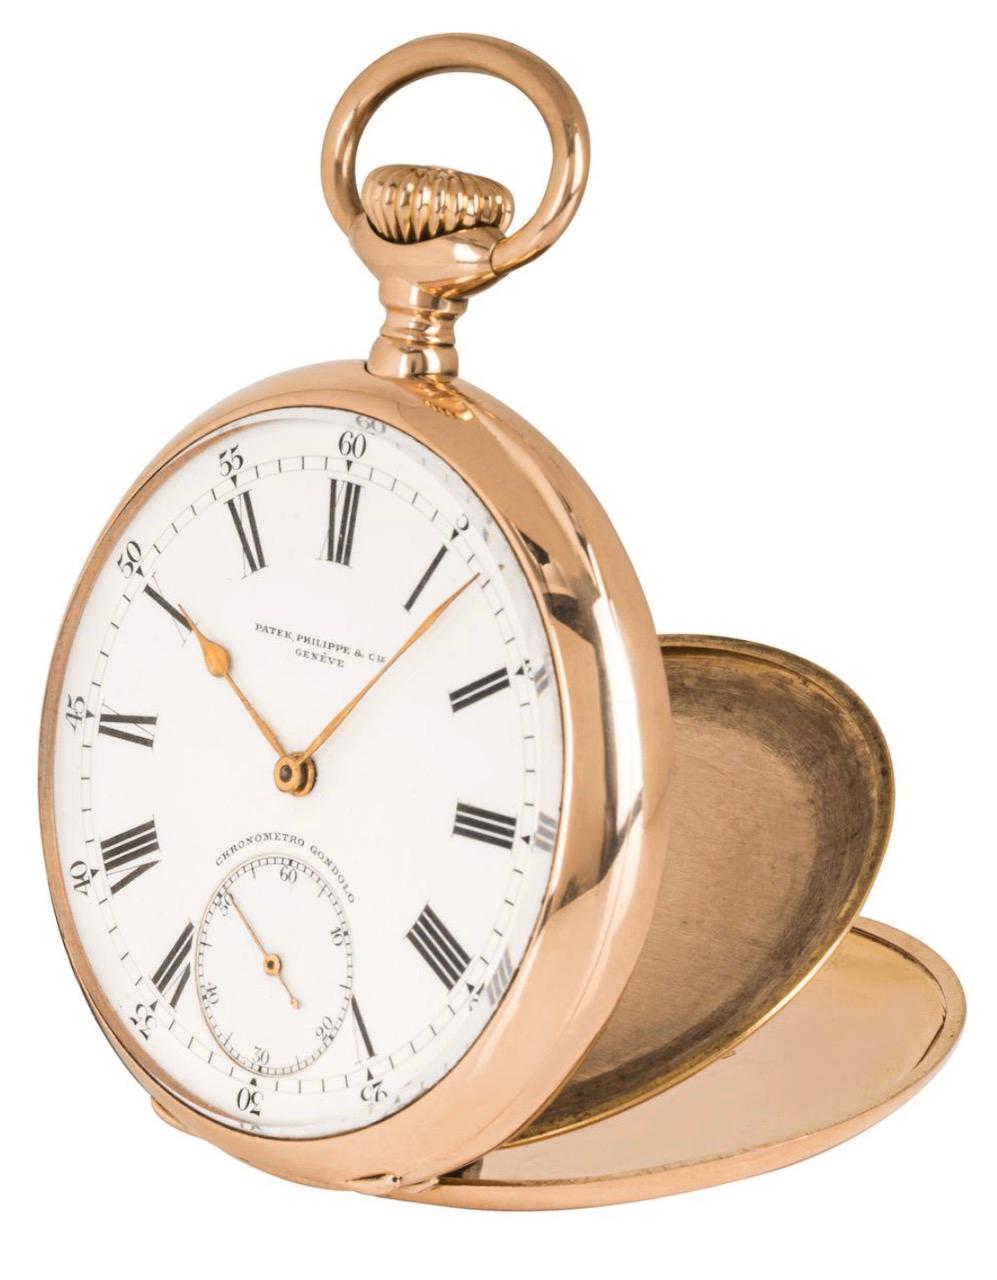 A Patek Philippe 18ct rose gold, keyless lever Gondolo open face pocket watch, 1910.

Dial: A perfect white enamel Roman dial signed Patek Philippe & Co Genève with sub second dial signed above Chronometro Gondolo with gold spade hands covered by a